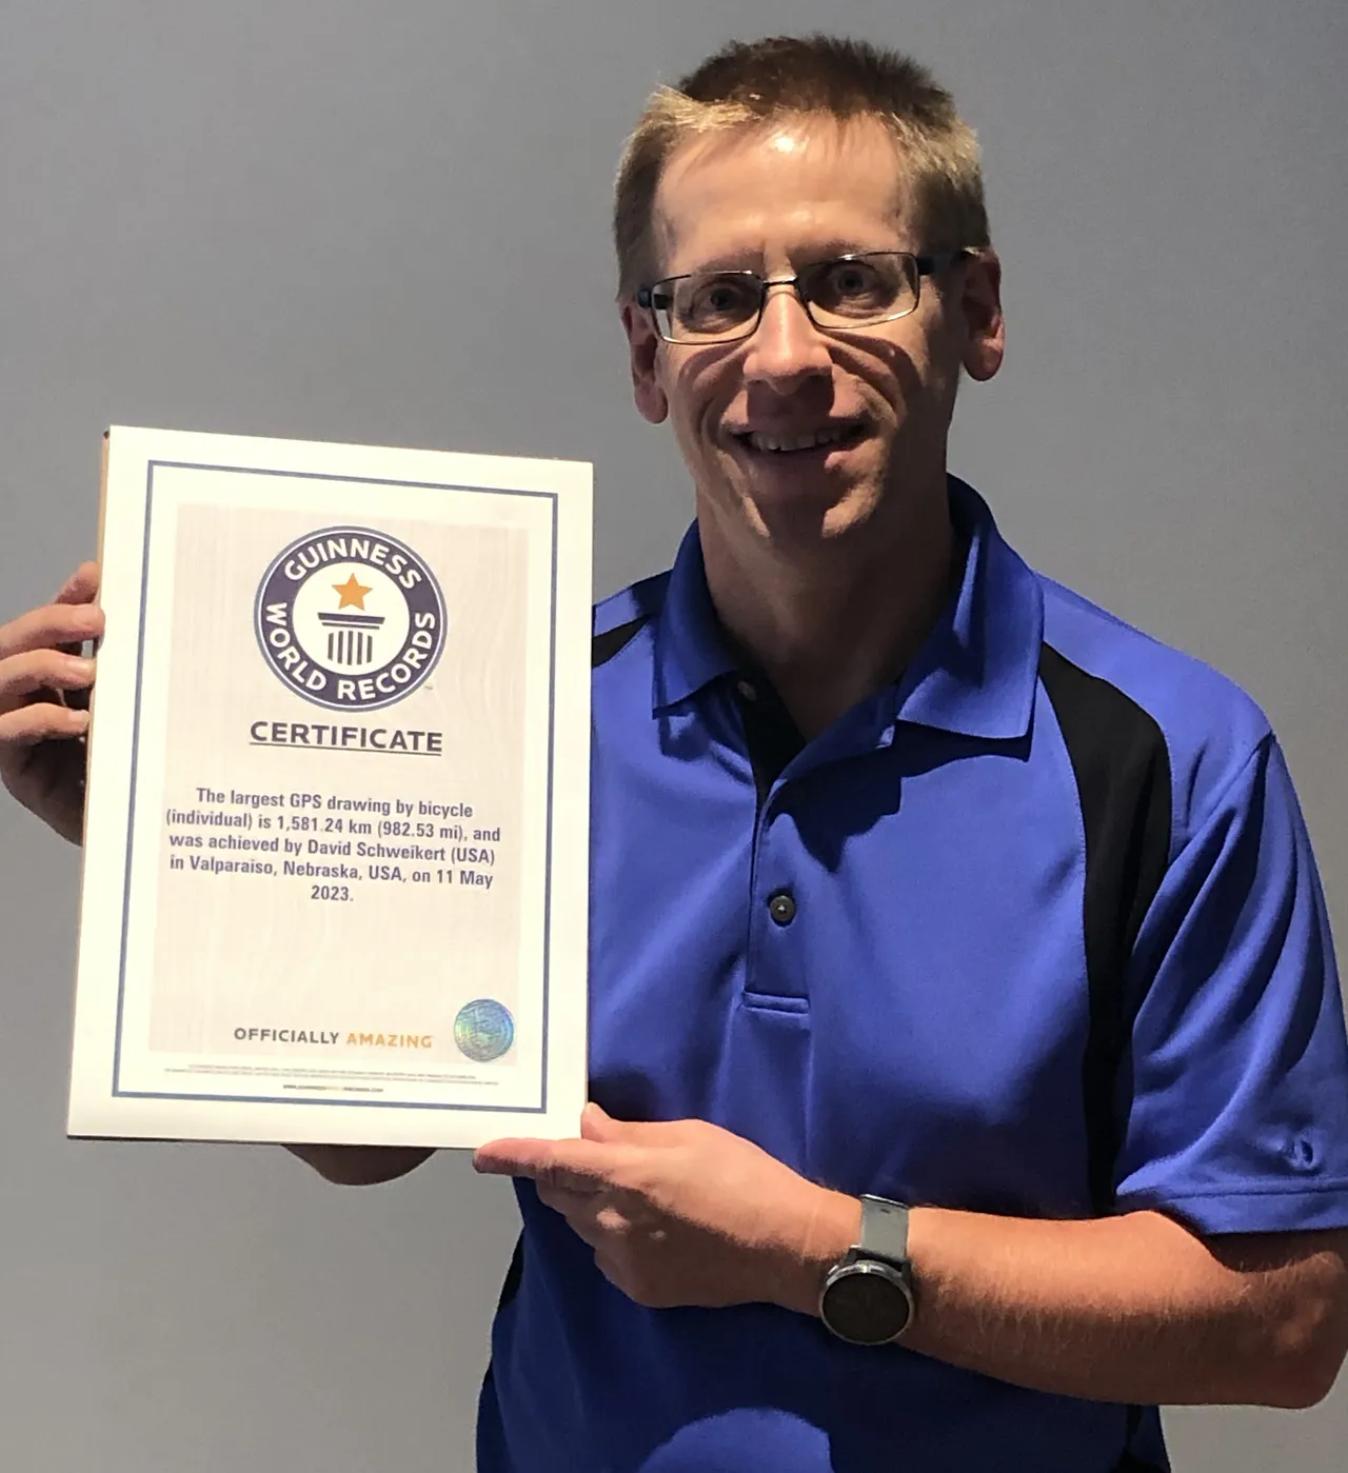 David Schweikert has now been officially named as the Guinness World Record holder